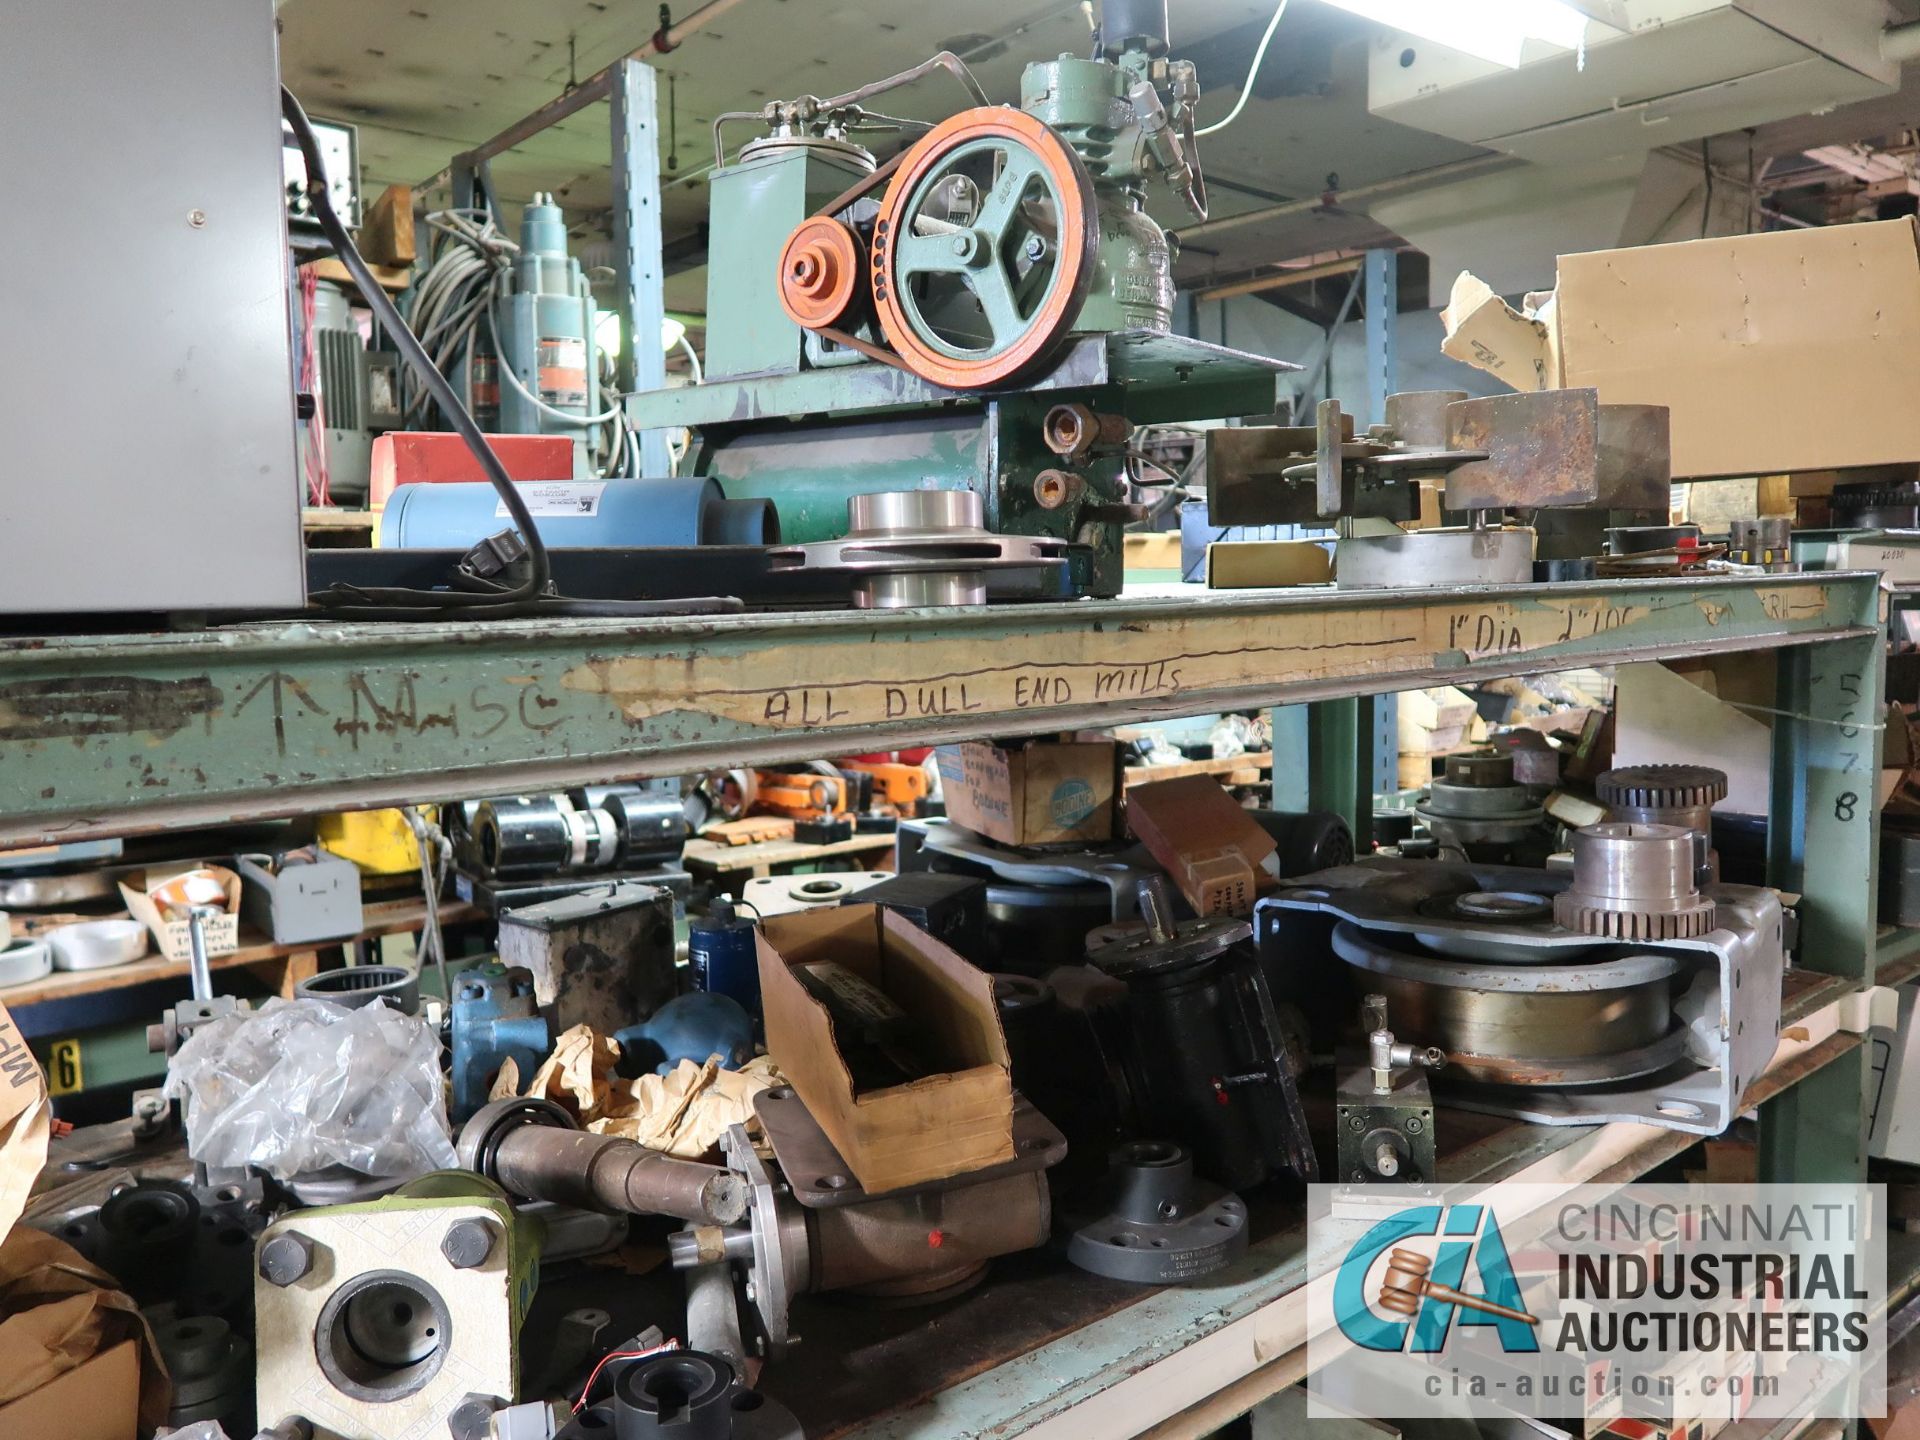 (LOT) MACHINE PARTS, COMPRESSORS, REDUCERS, GEARS, MOTORS, AND OTHER (4) SECTIONS RACK - Image 23 of 28